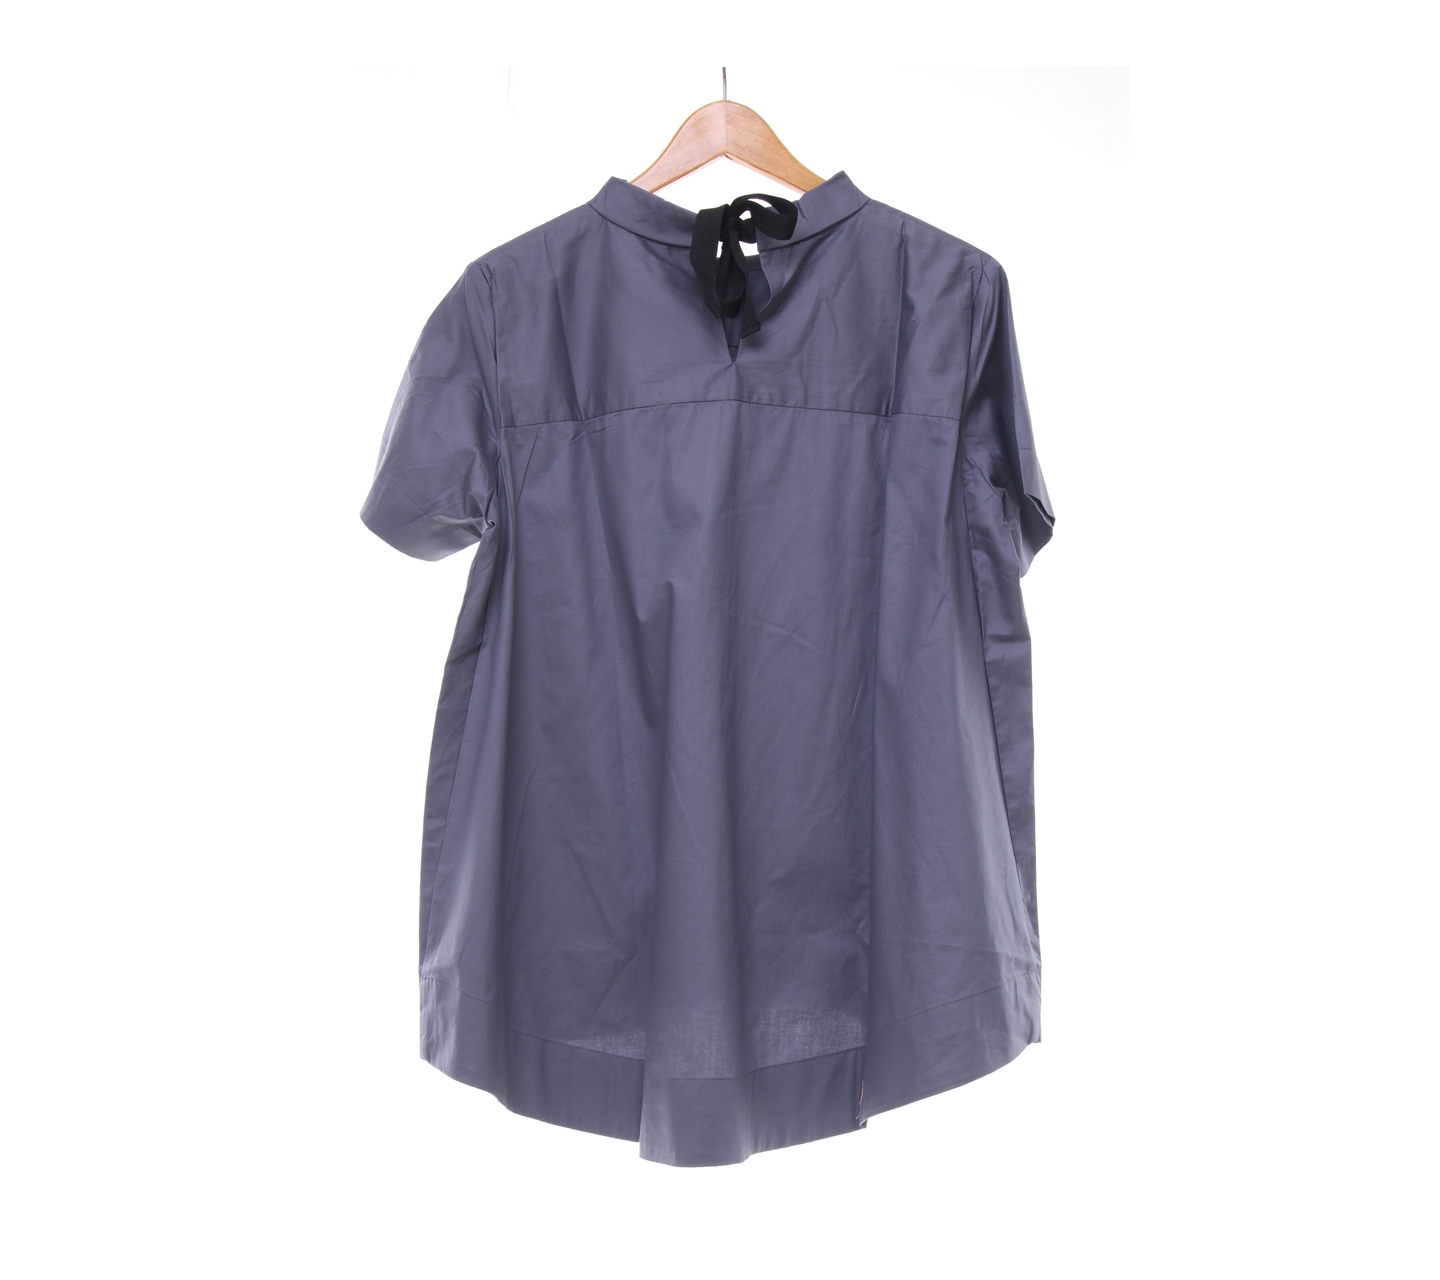 ATS The Label Grey Blouse